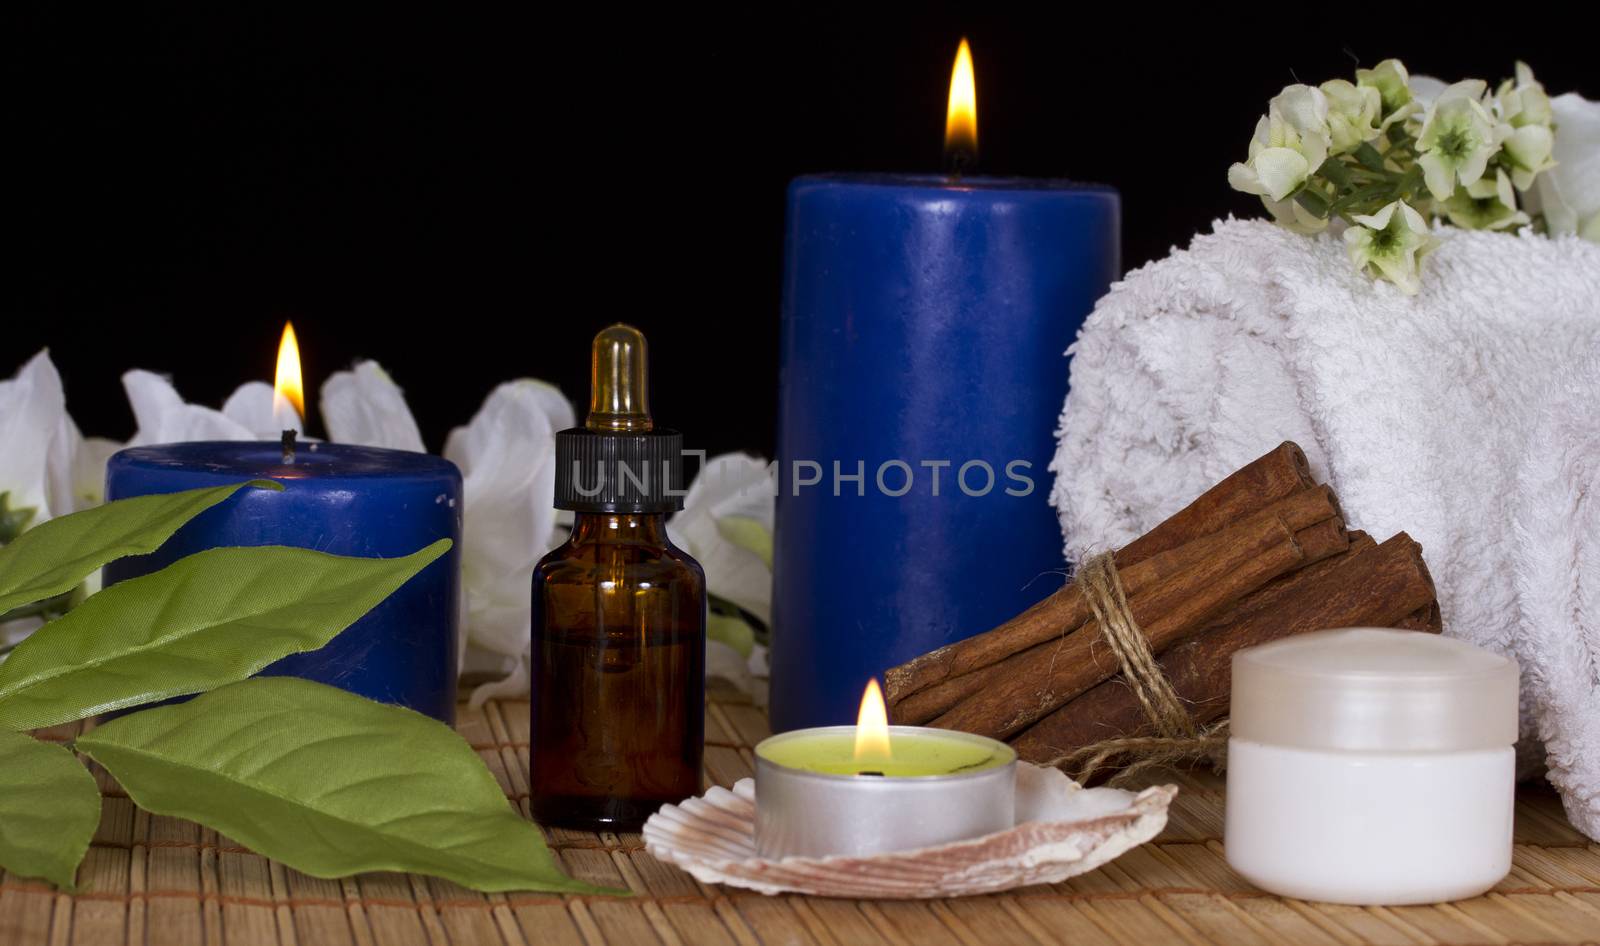 Accessories for spa treatments in the candlelight